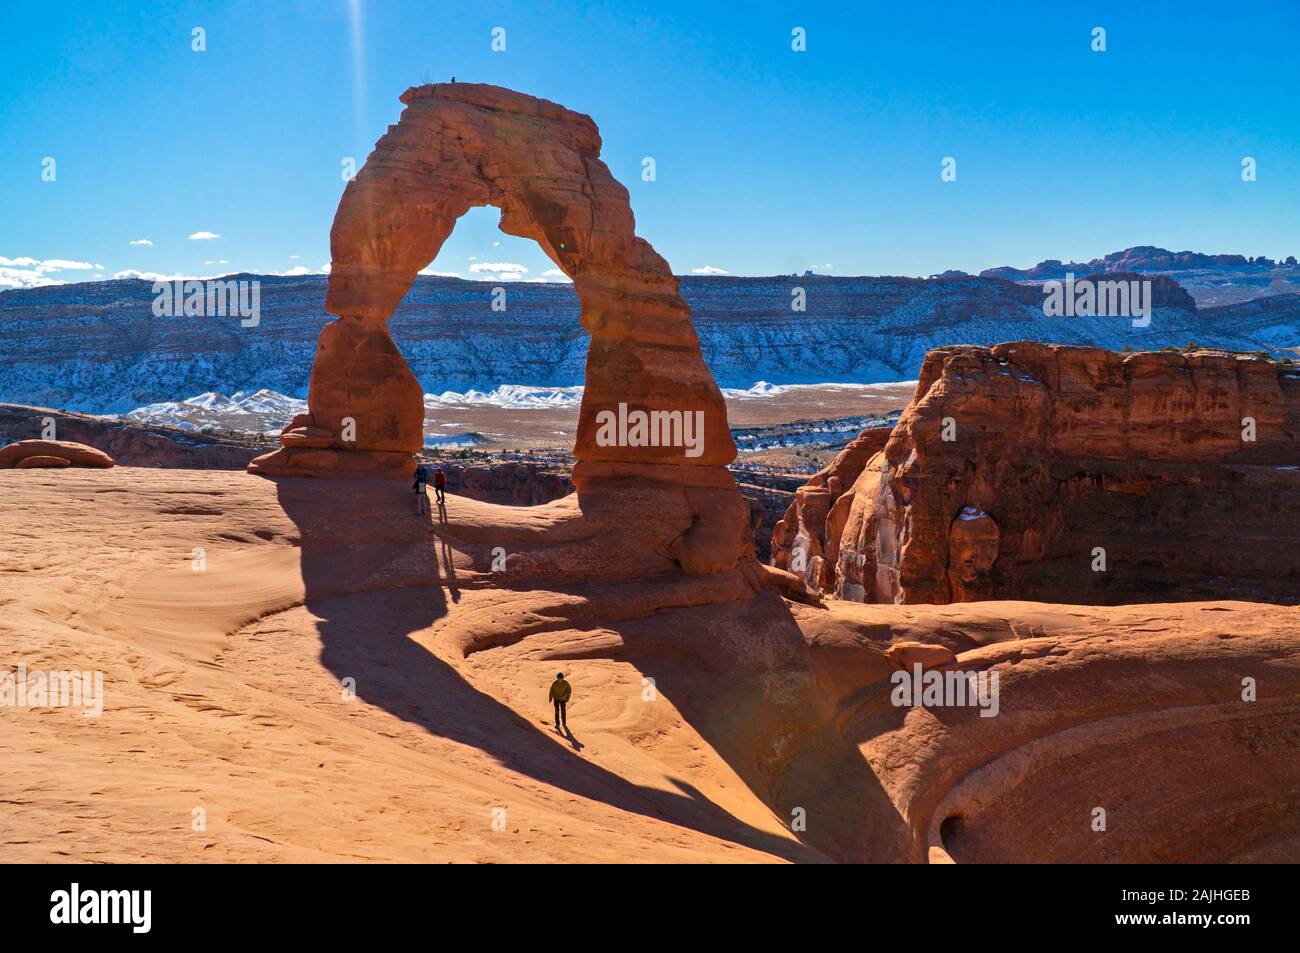 The Delicate Arch, famous orange rock formation in Arches National Park, Utah, USA. Stock Photo